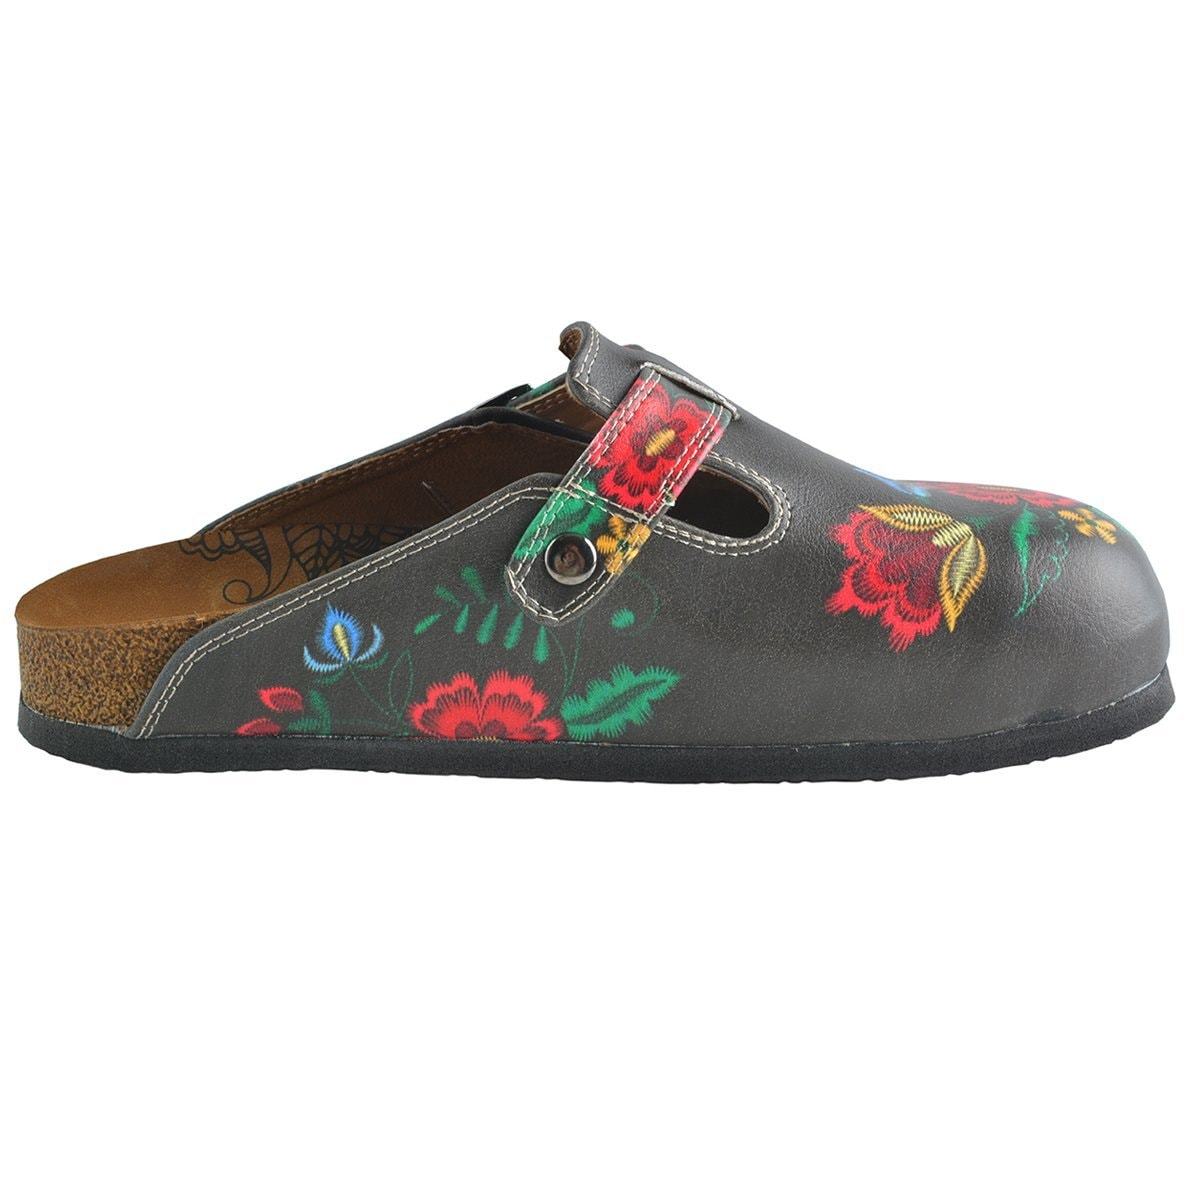 Red, Grey, Yellow Colored Flowers Patterned Clogs - WCAL355